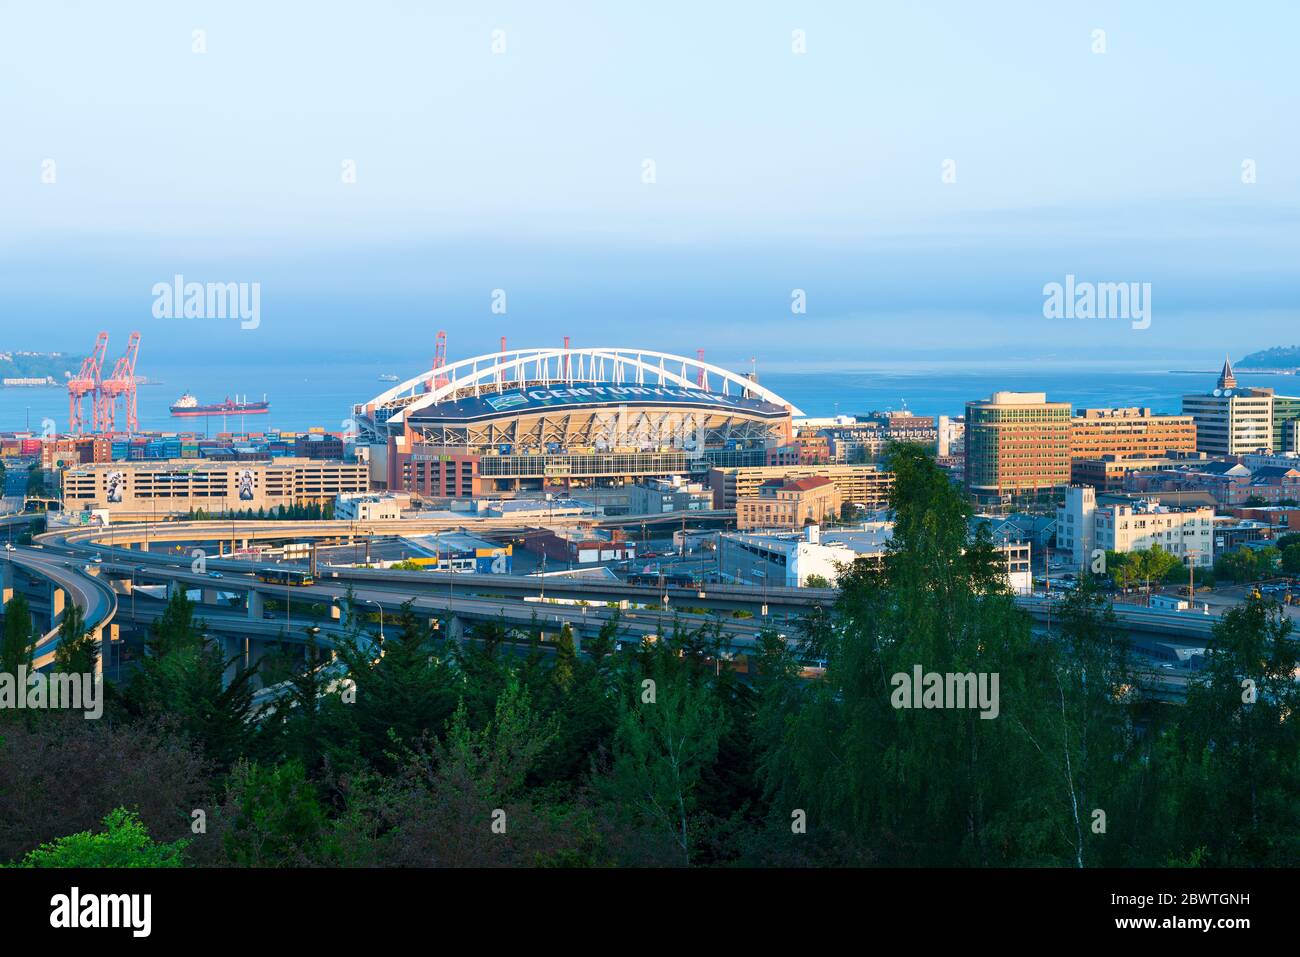 Pioneer Square district, Seattle, Washington State, United States - Panoramic view of industrial district with Centurylink Field stadiu Stock Photo